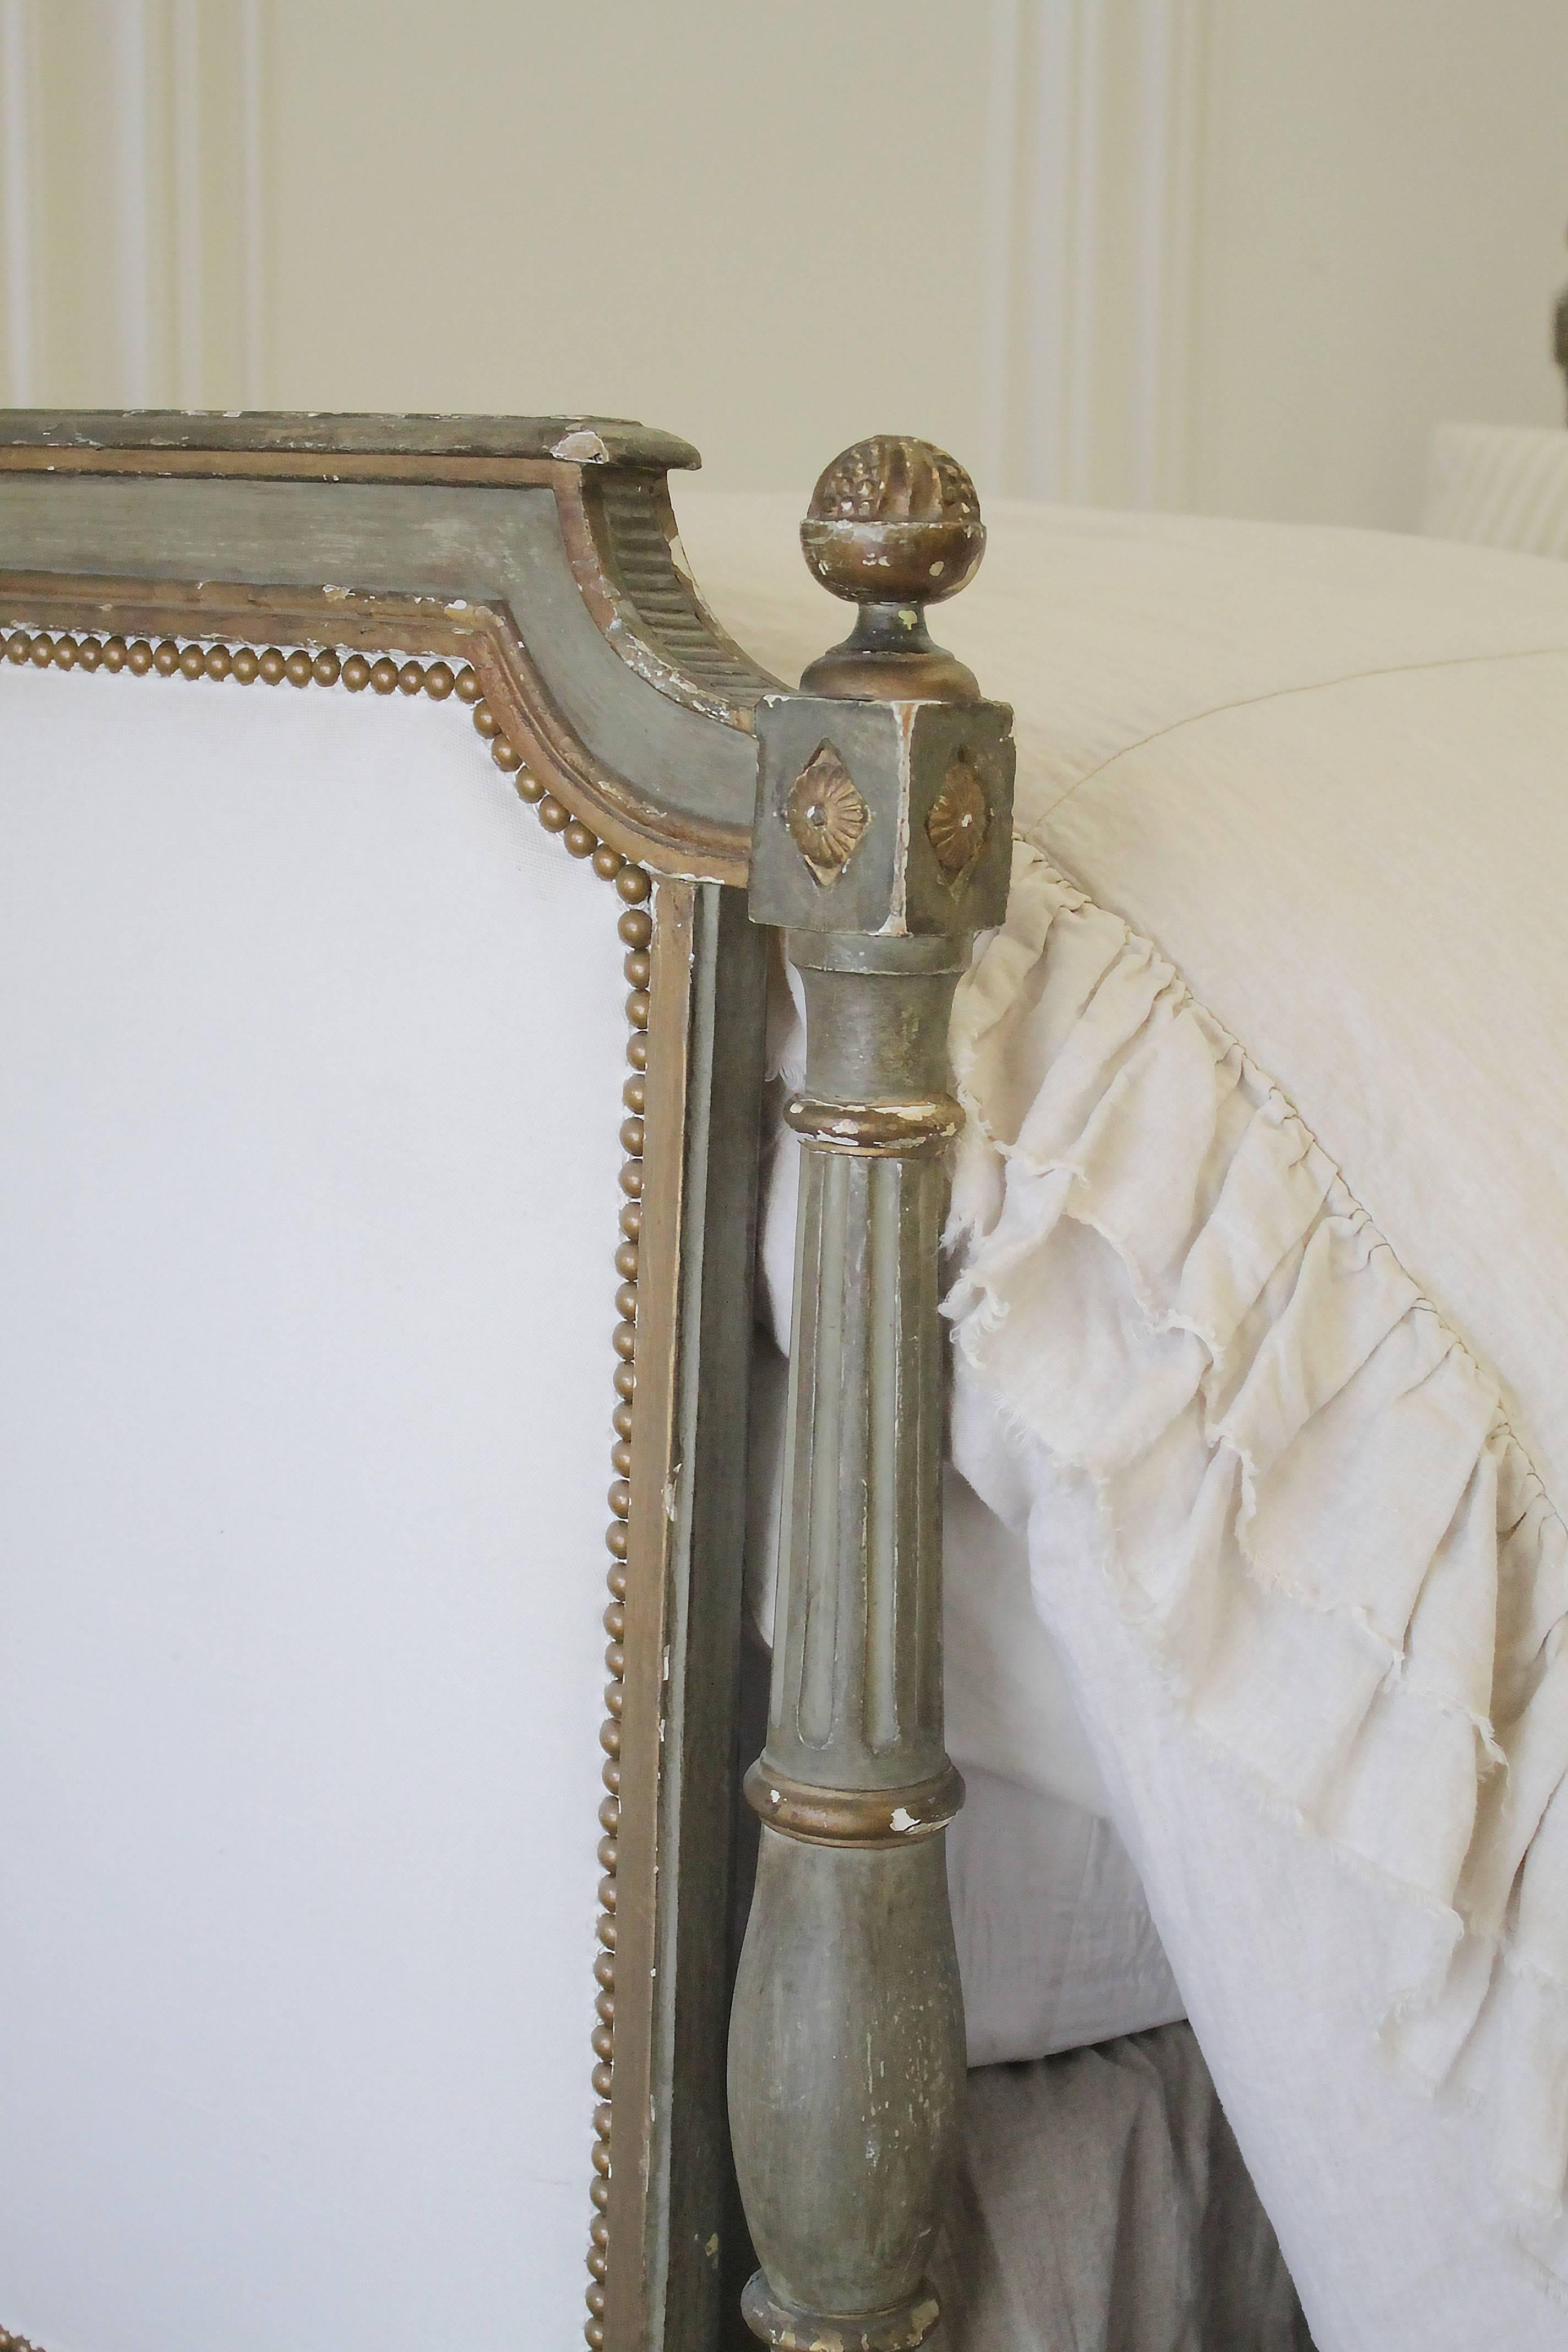 Lovely original painted Louis XVI twin bed, with white cotton upholstery and antique bronze nailhead trim. The painted finish is a muted green with grey hues, and gilded accents. This bed has wonderful patina, perfectly chippy with white peeking